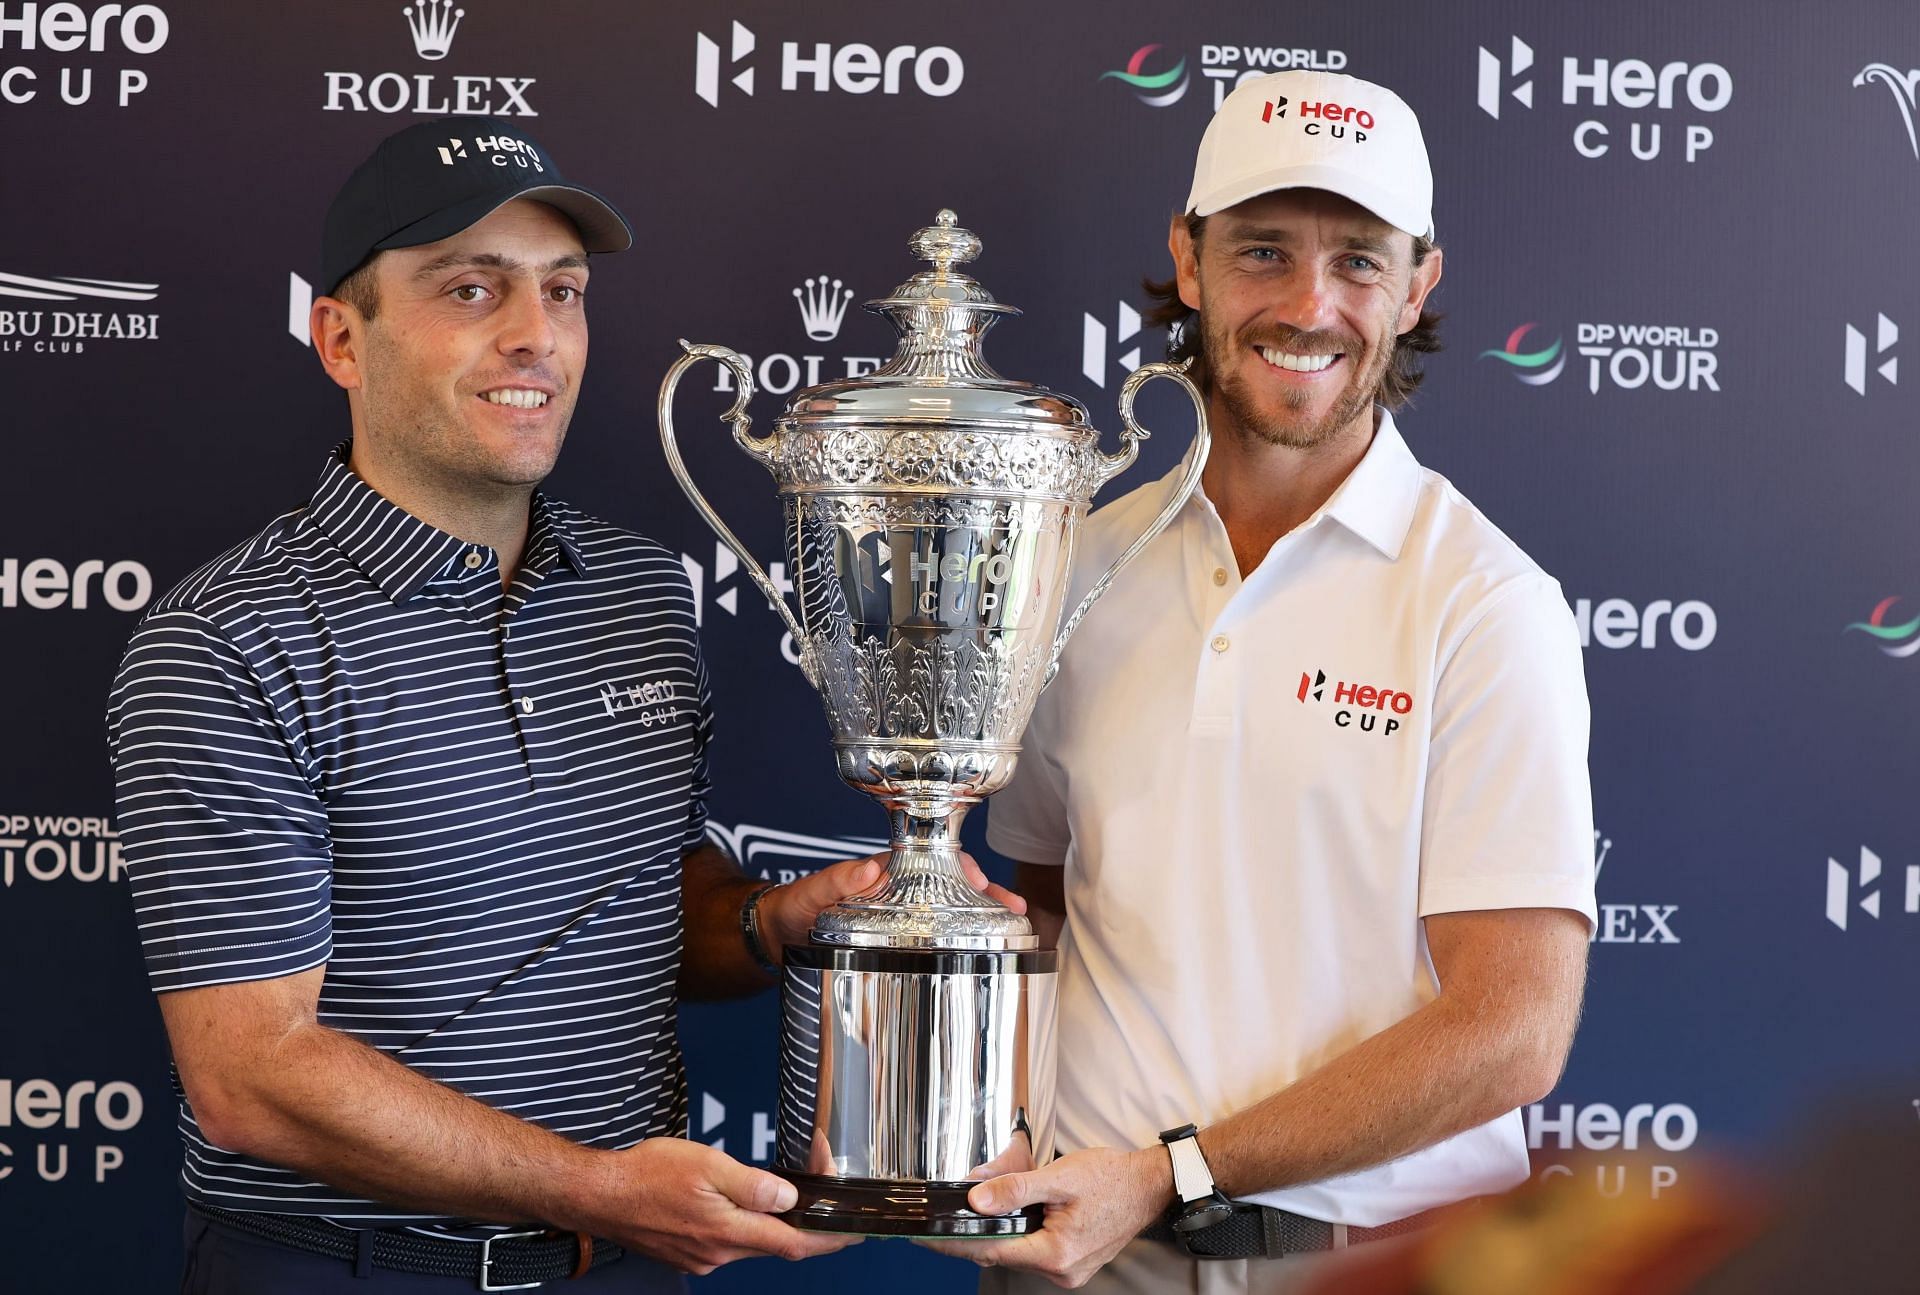 Francesco Molinari and Fleetwood pose with the Hero Cup trophy